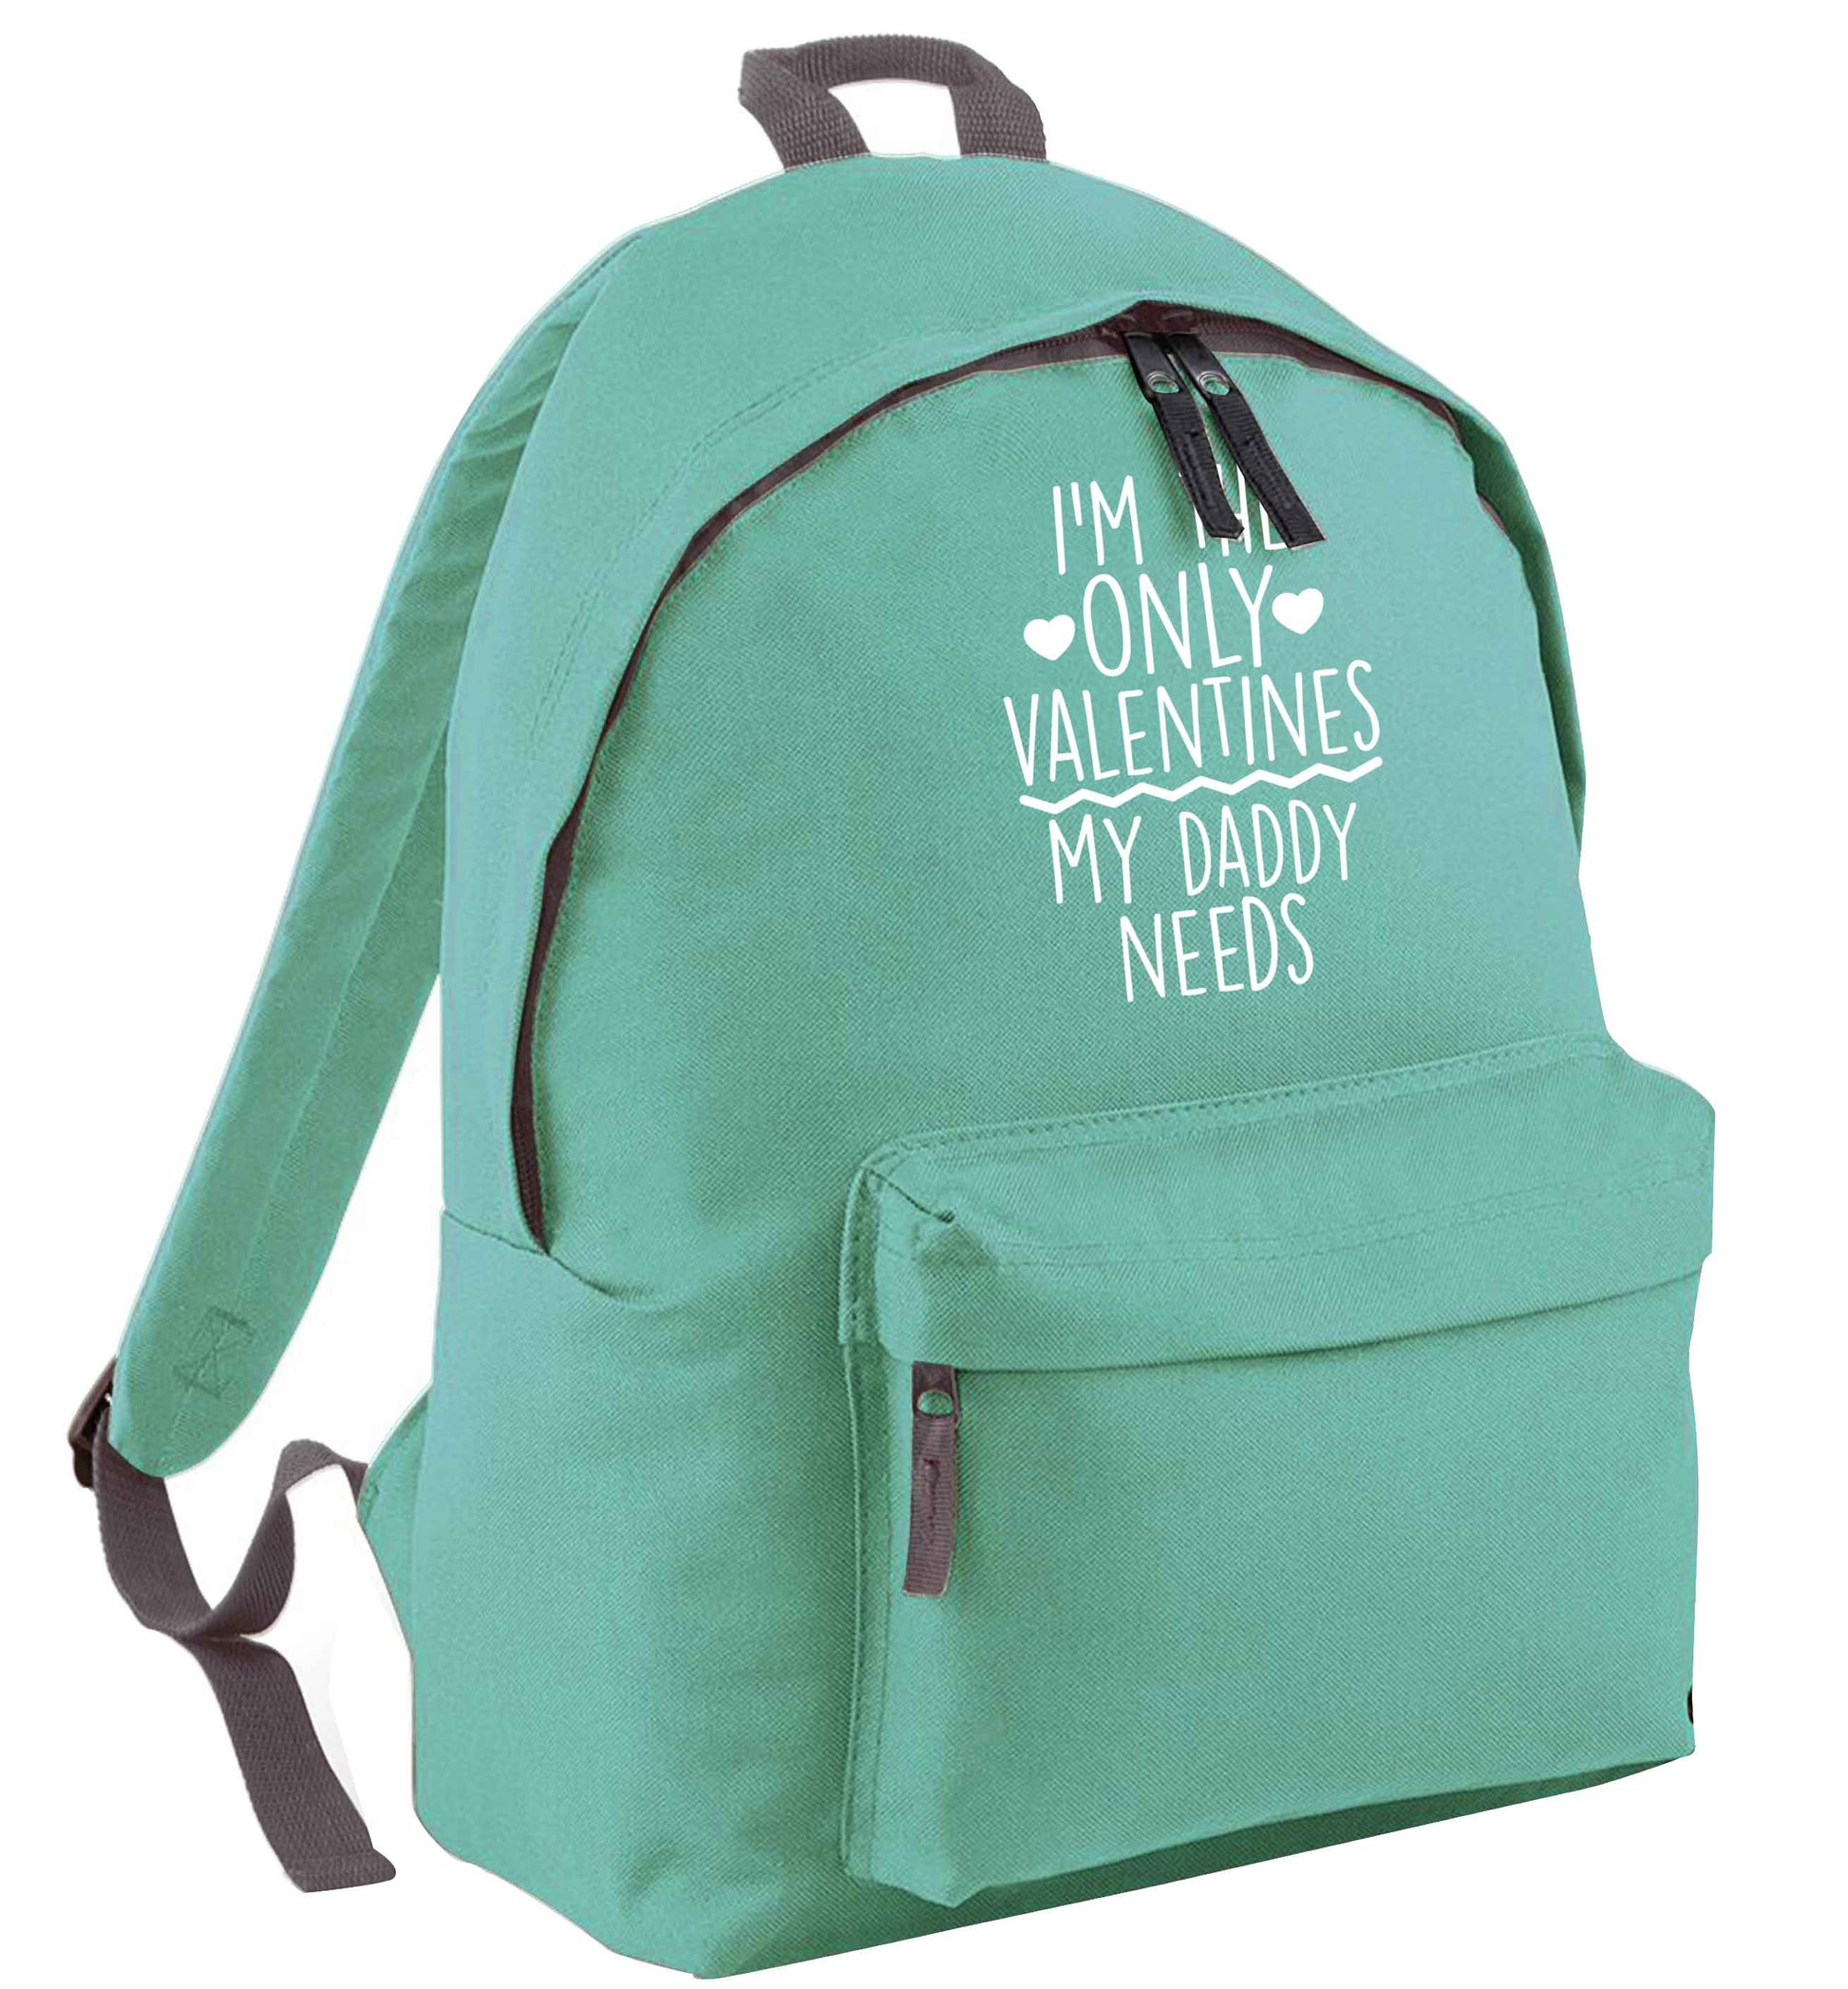 I'm the only valentines my daddy needs mint adults backpack